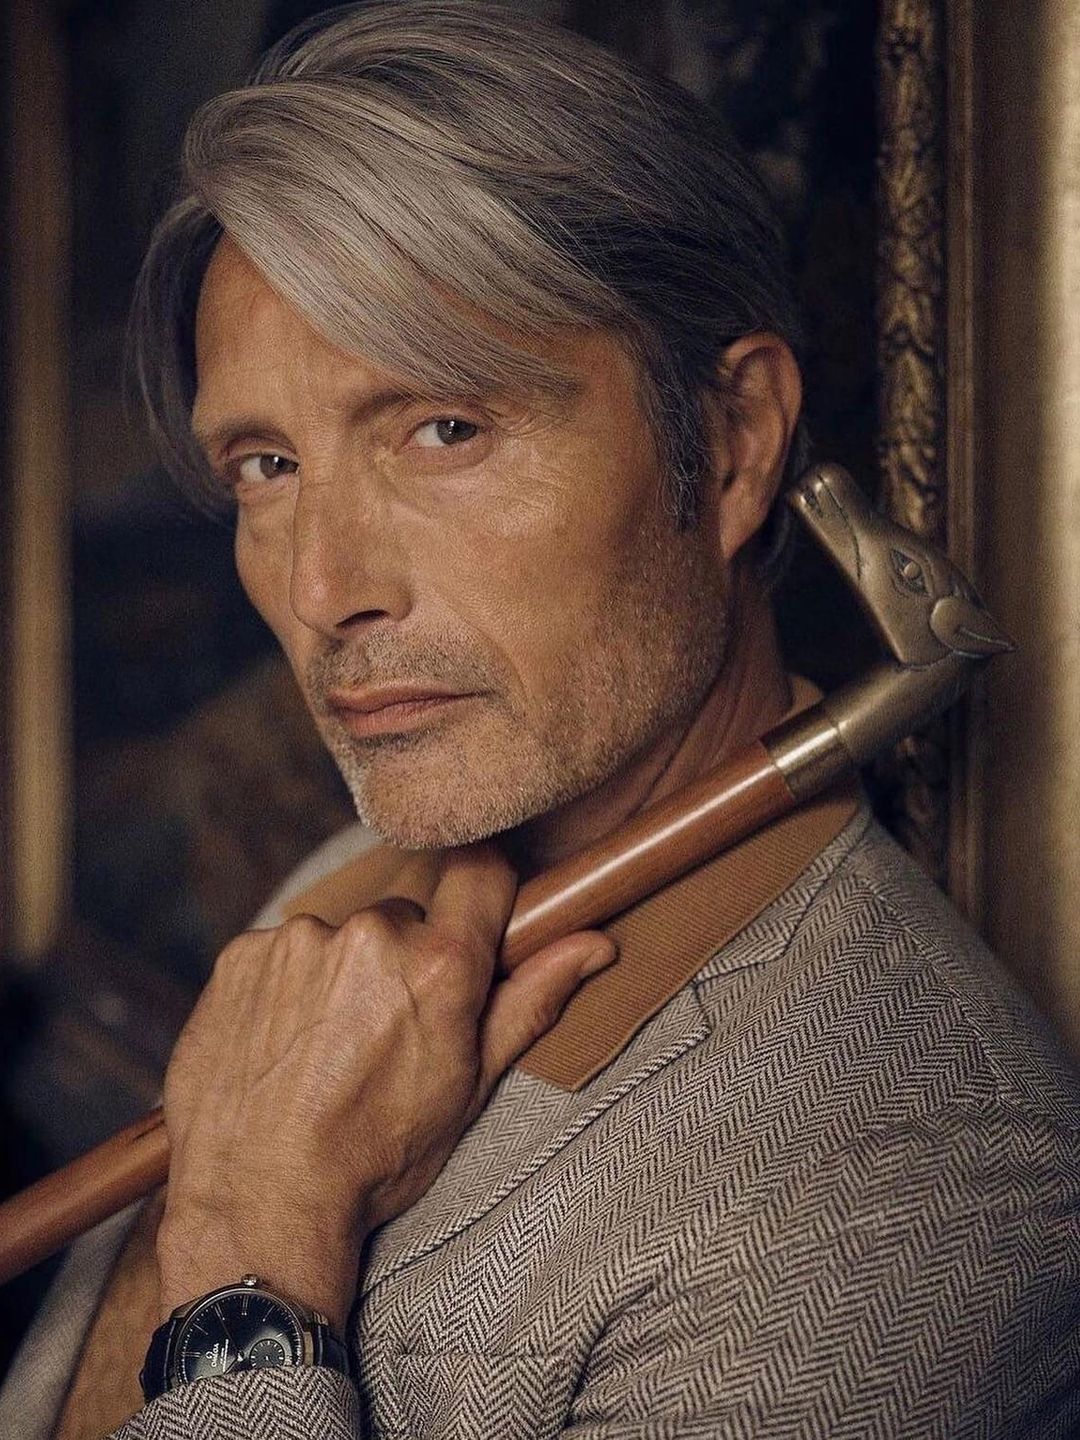 Mads Mikkelsen where did he study